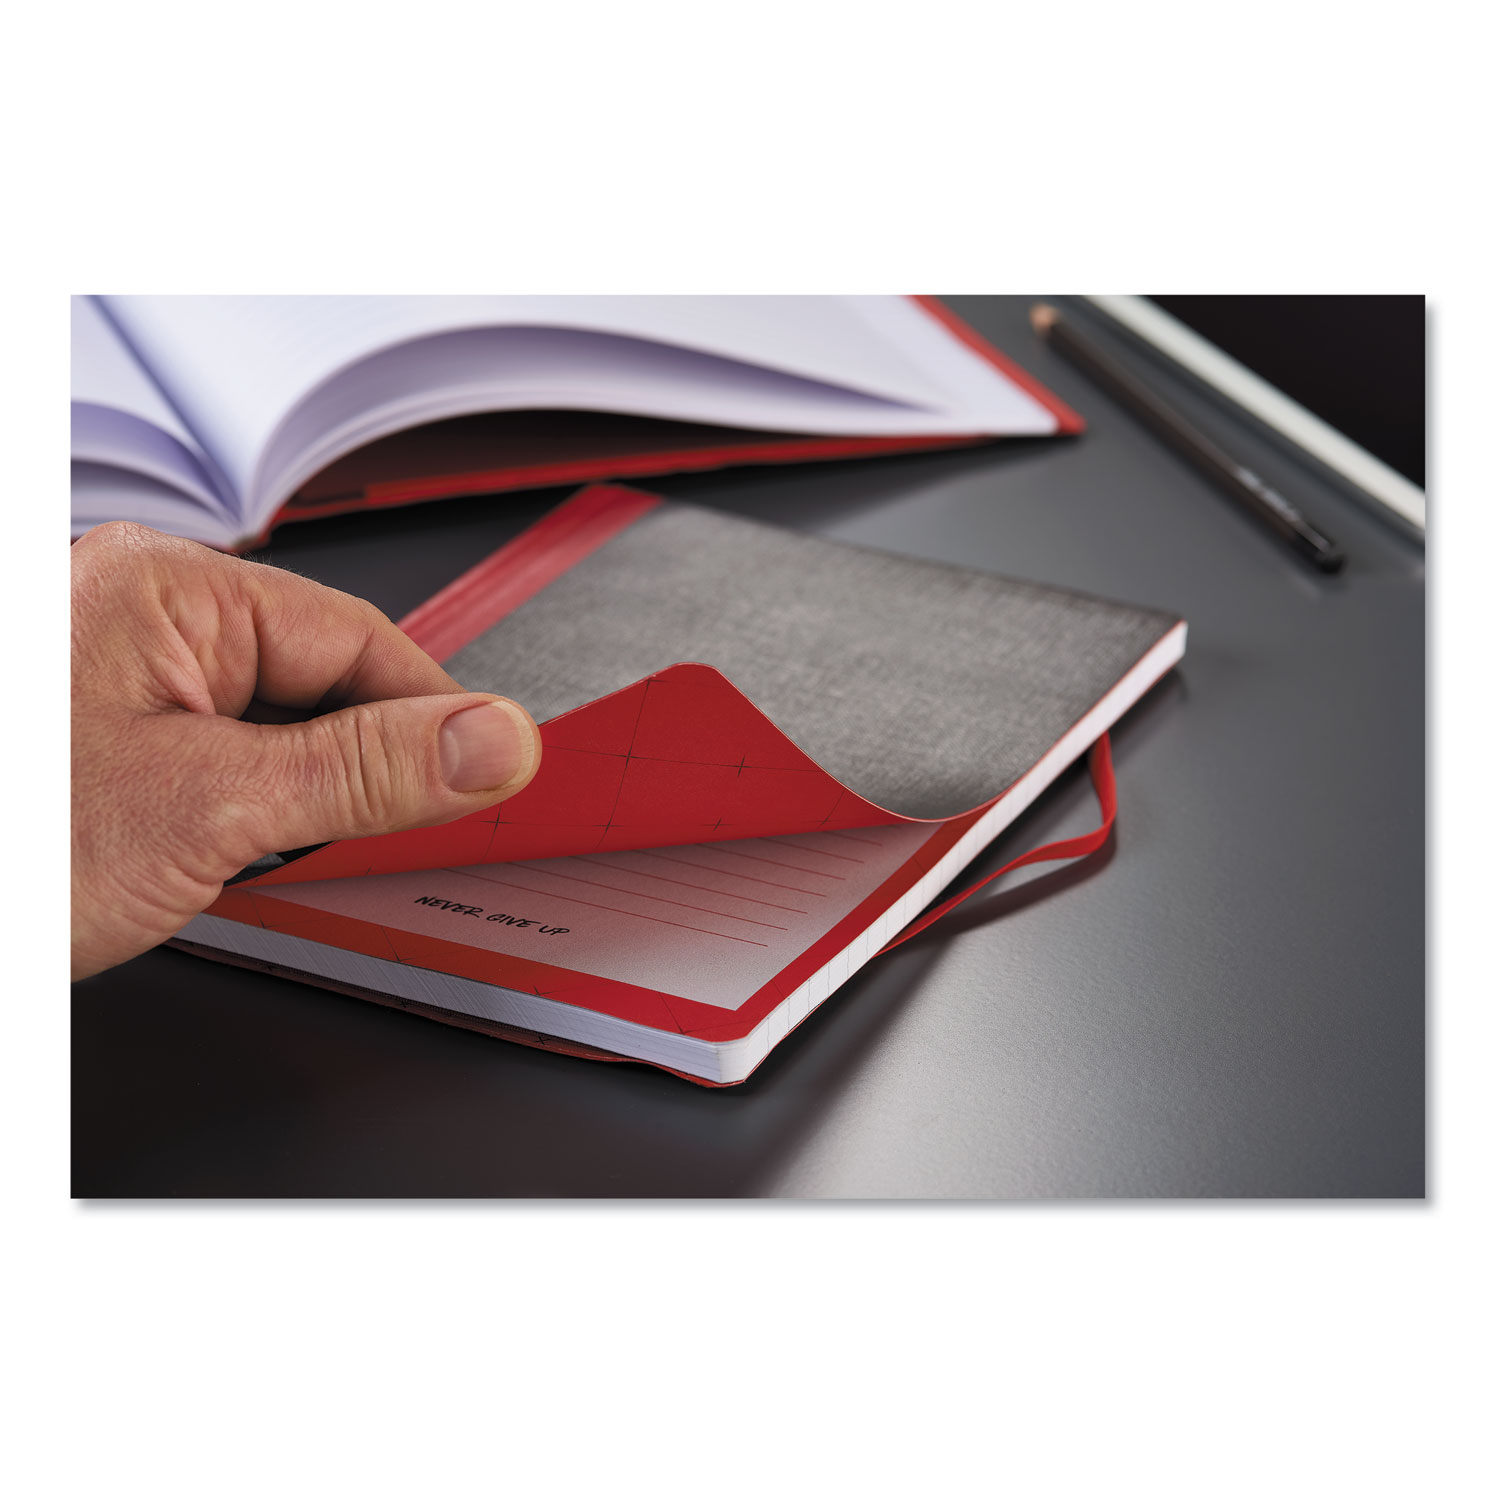  Black n' Red 400110479 Flexible Casebound Notebooks, 1 Subject, Wide/Legal Rule, Black/Red Cover, 9.88 x 7, 72 Sheets (JDK400110479) 